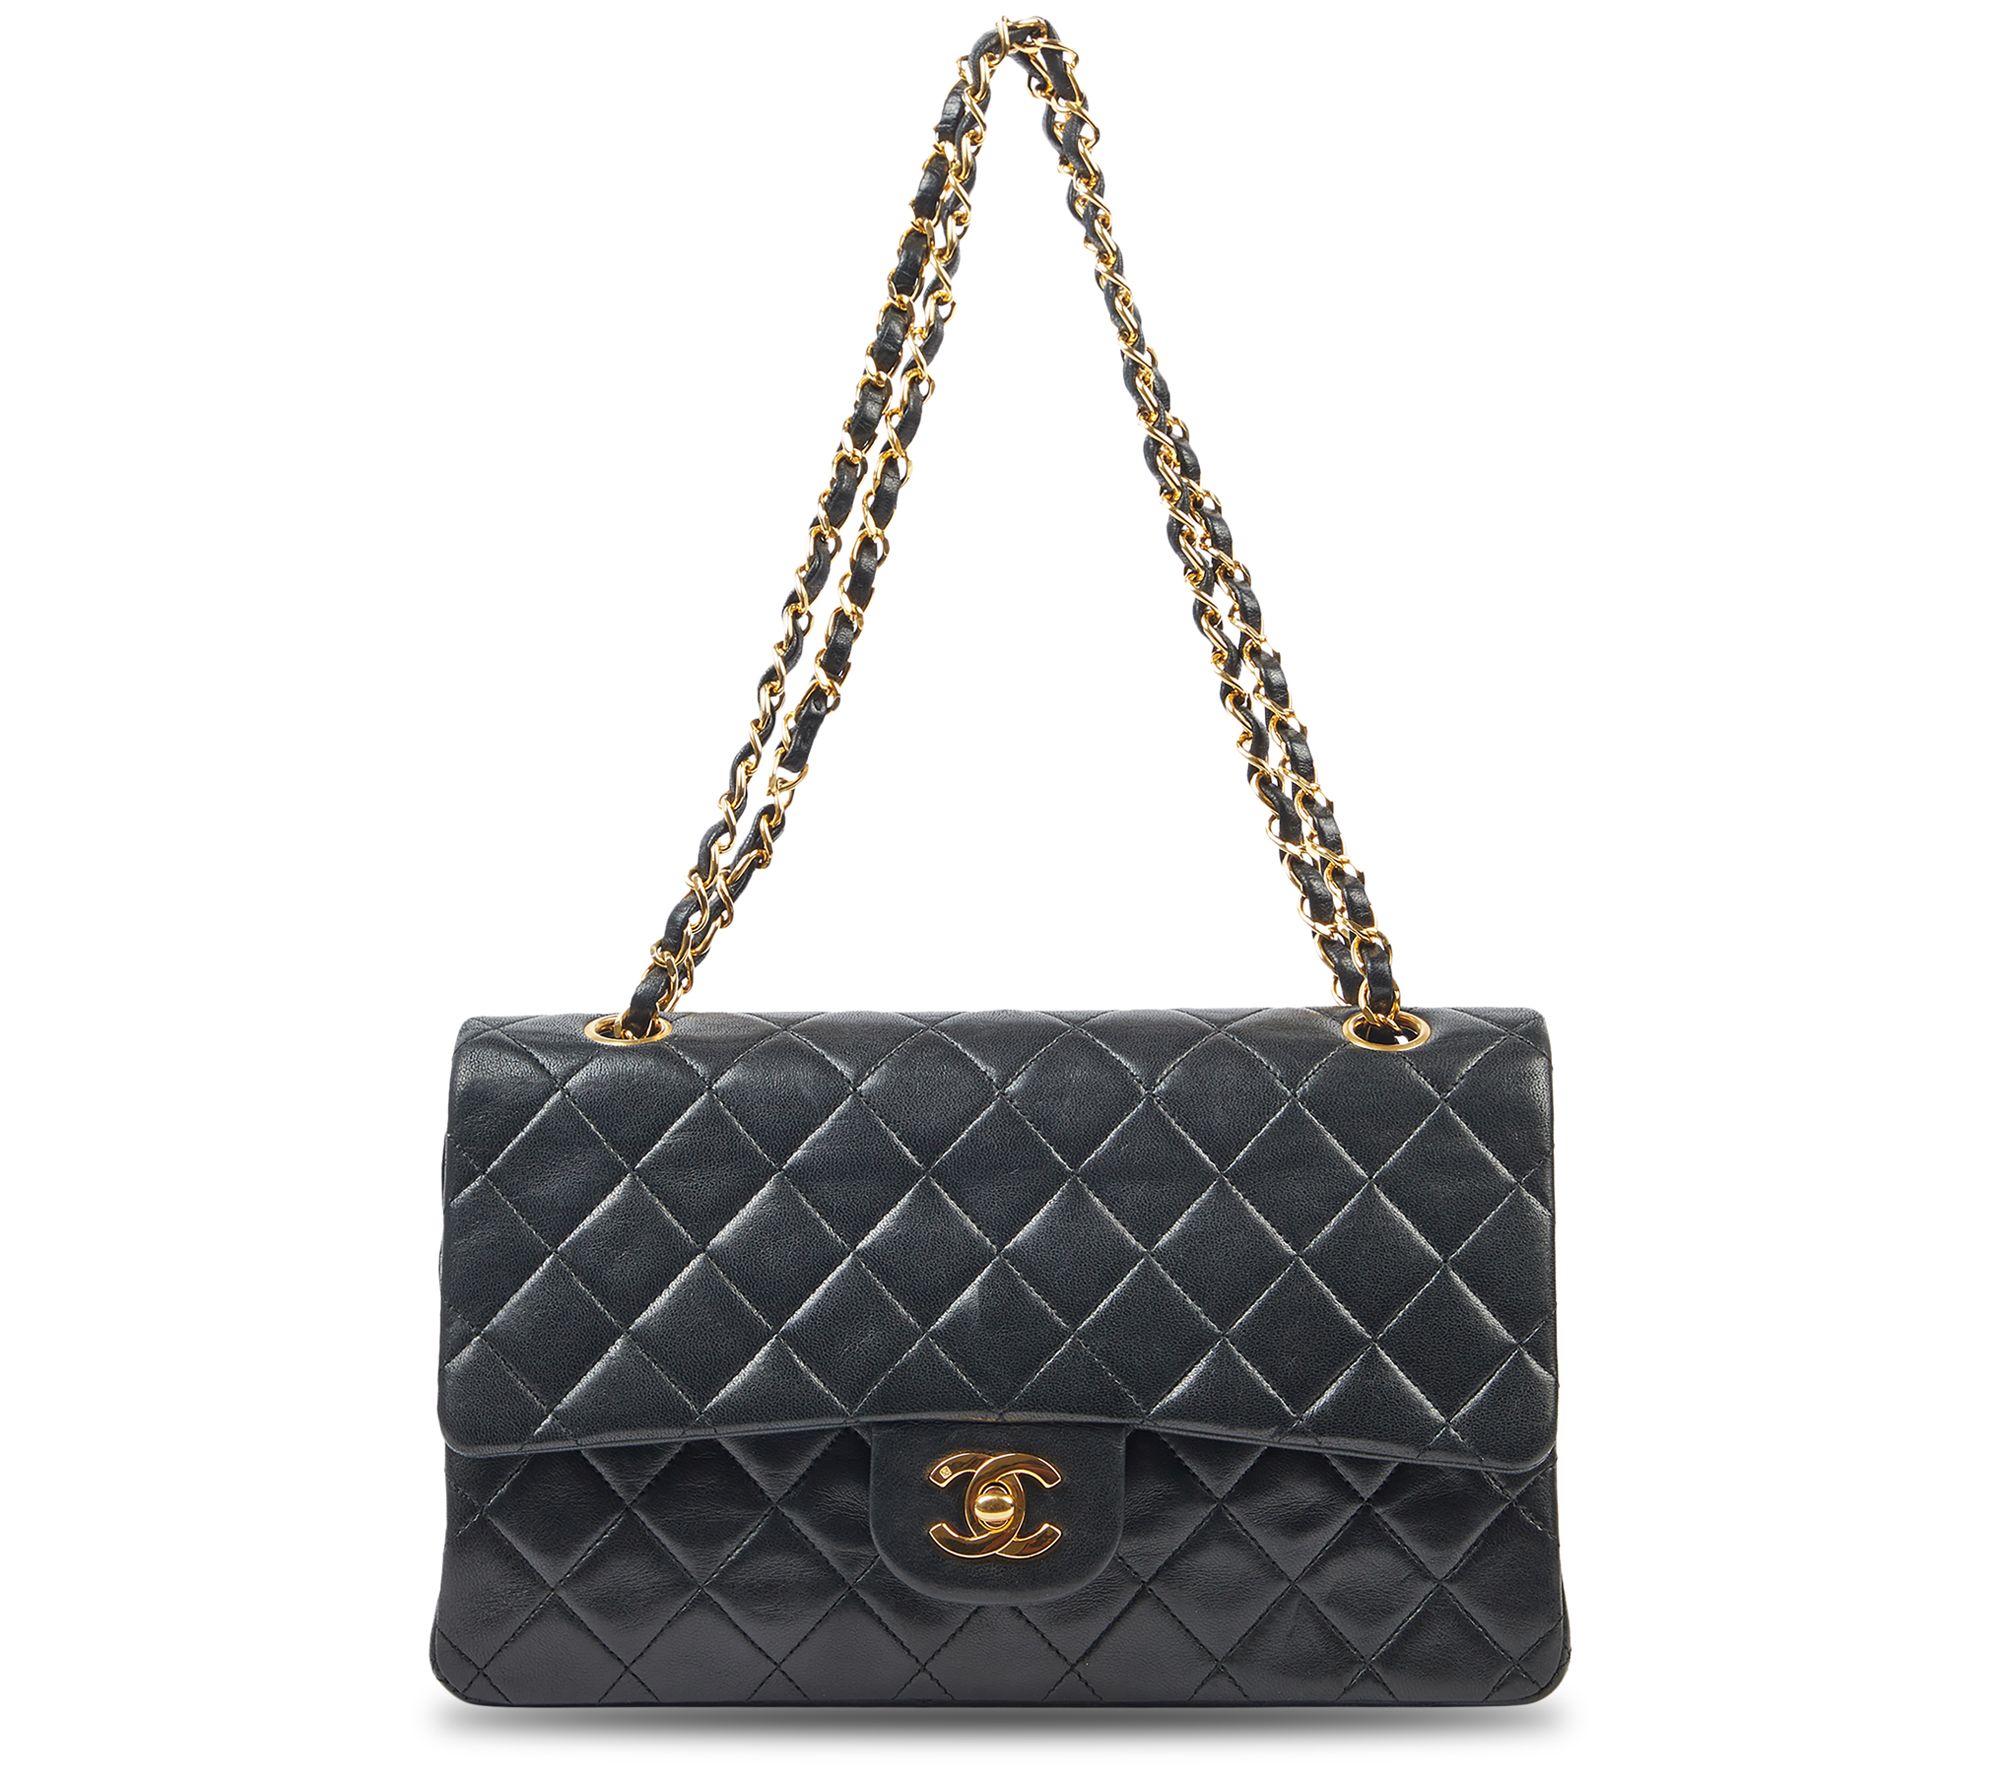 black chanel classic double flap small